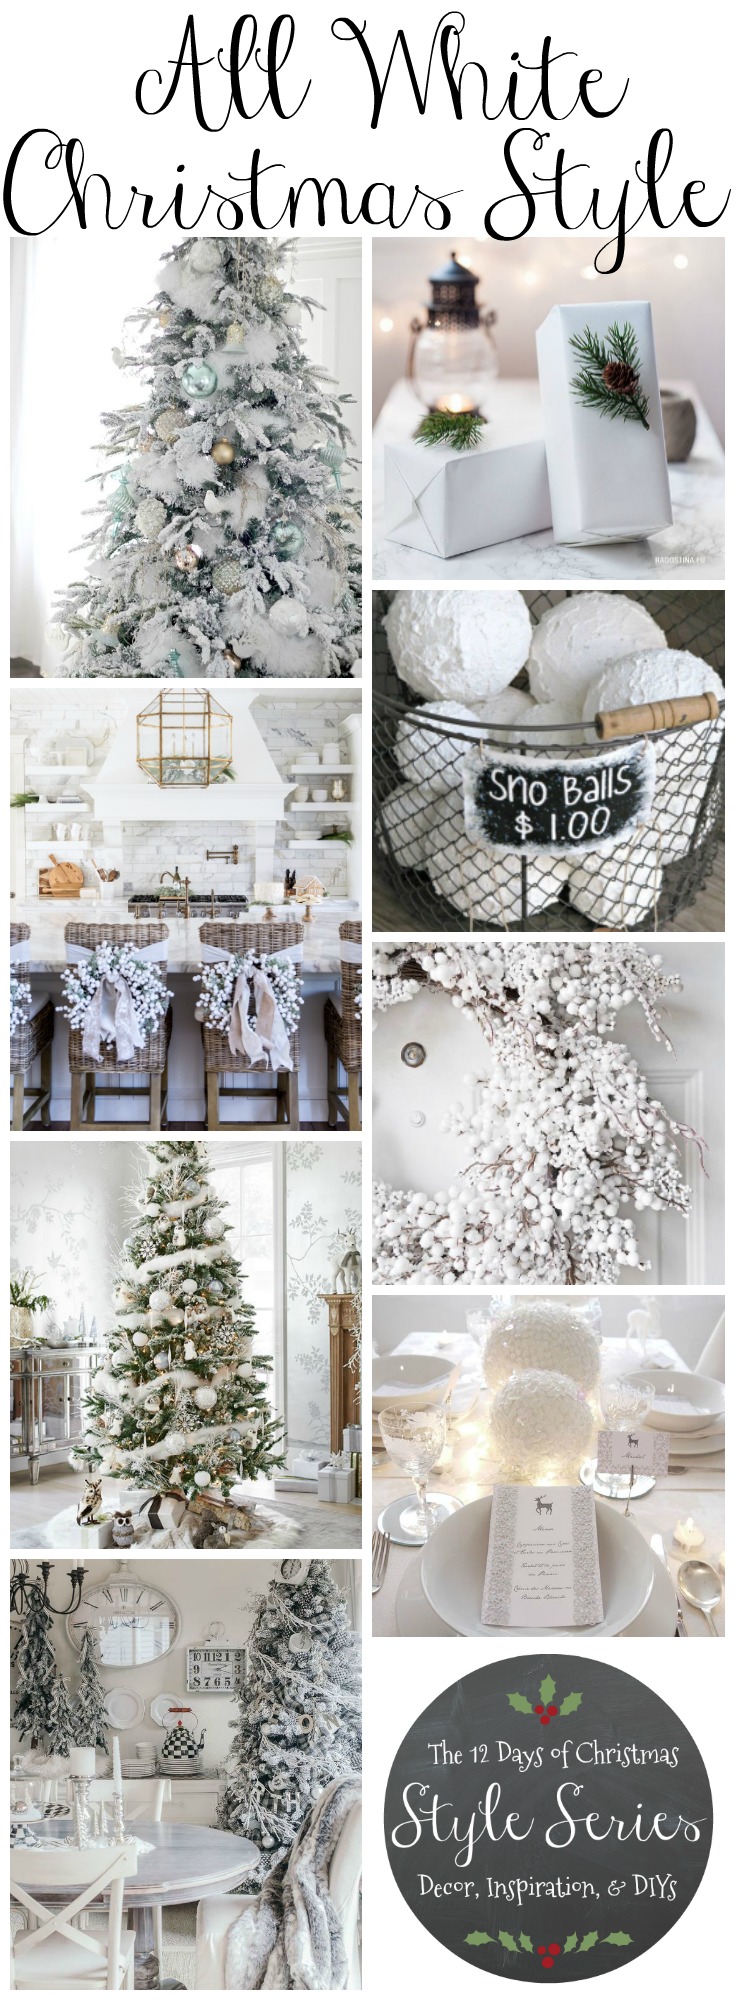 All White Christmas Style Series The Happy Housie